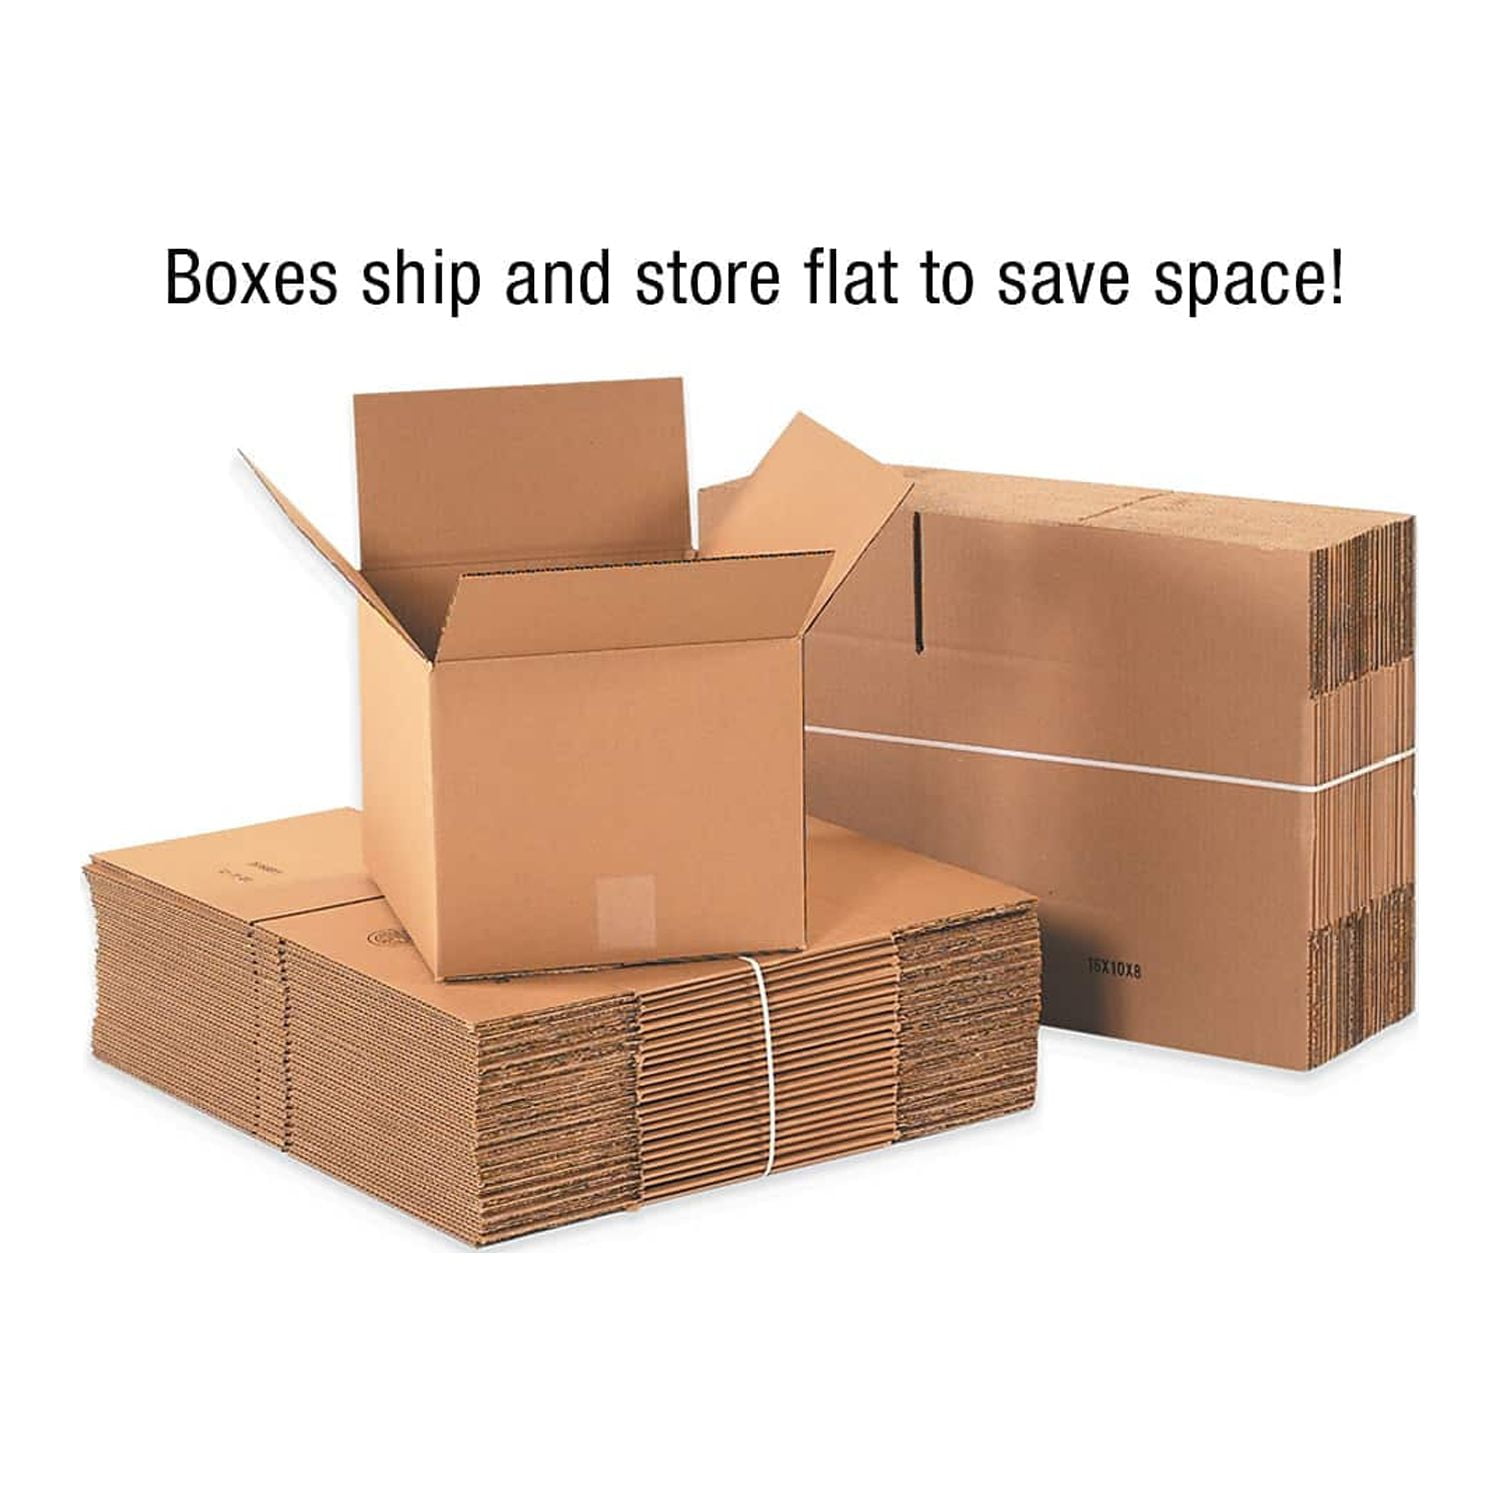  BOX USA BMT191310 Corrugated Totes, 19 1/2 x 13 x 10, Kraft  (Pack of 25) : Industrial & Scientific